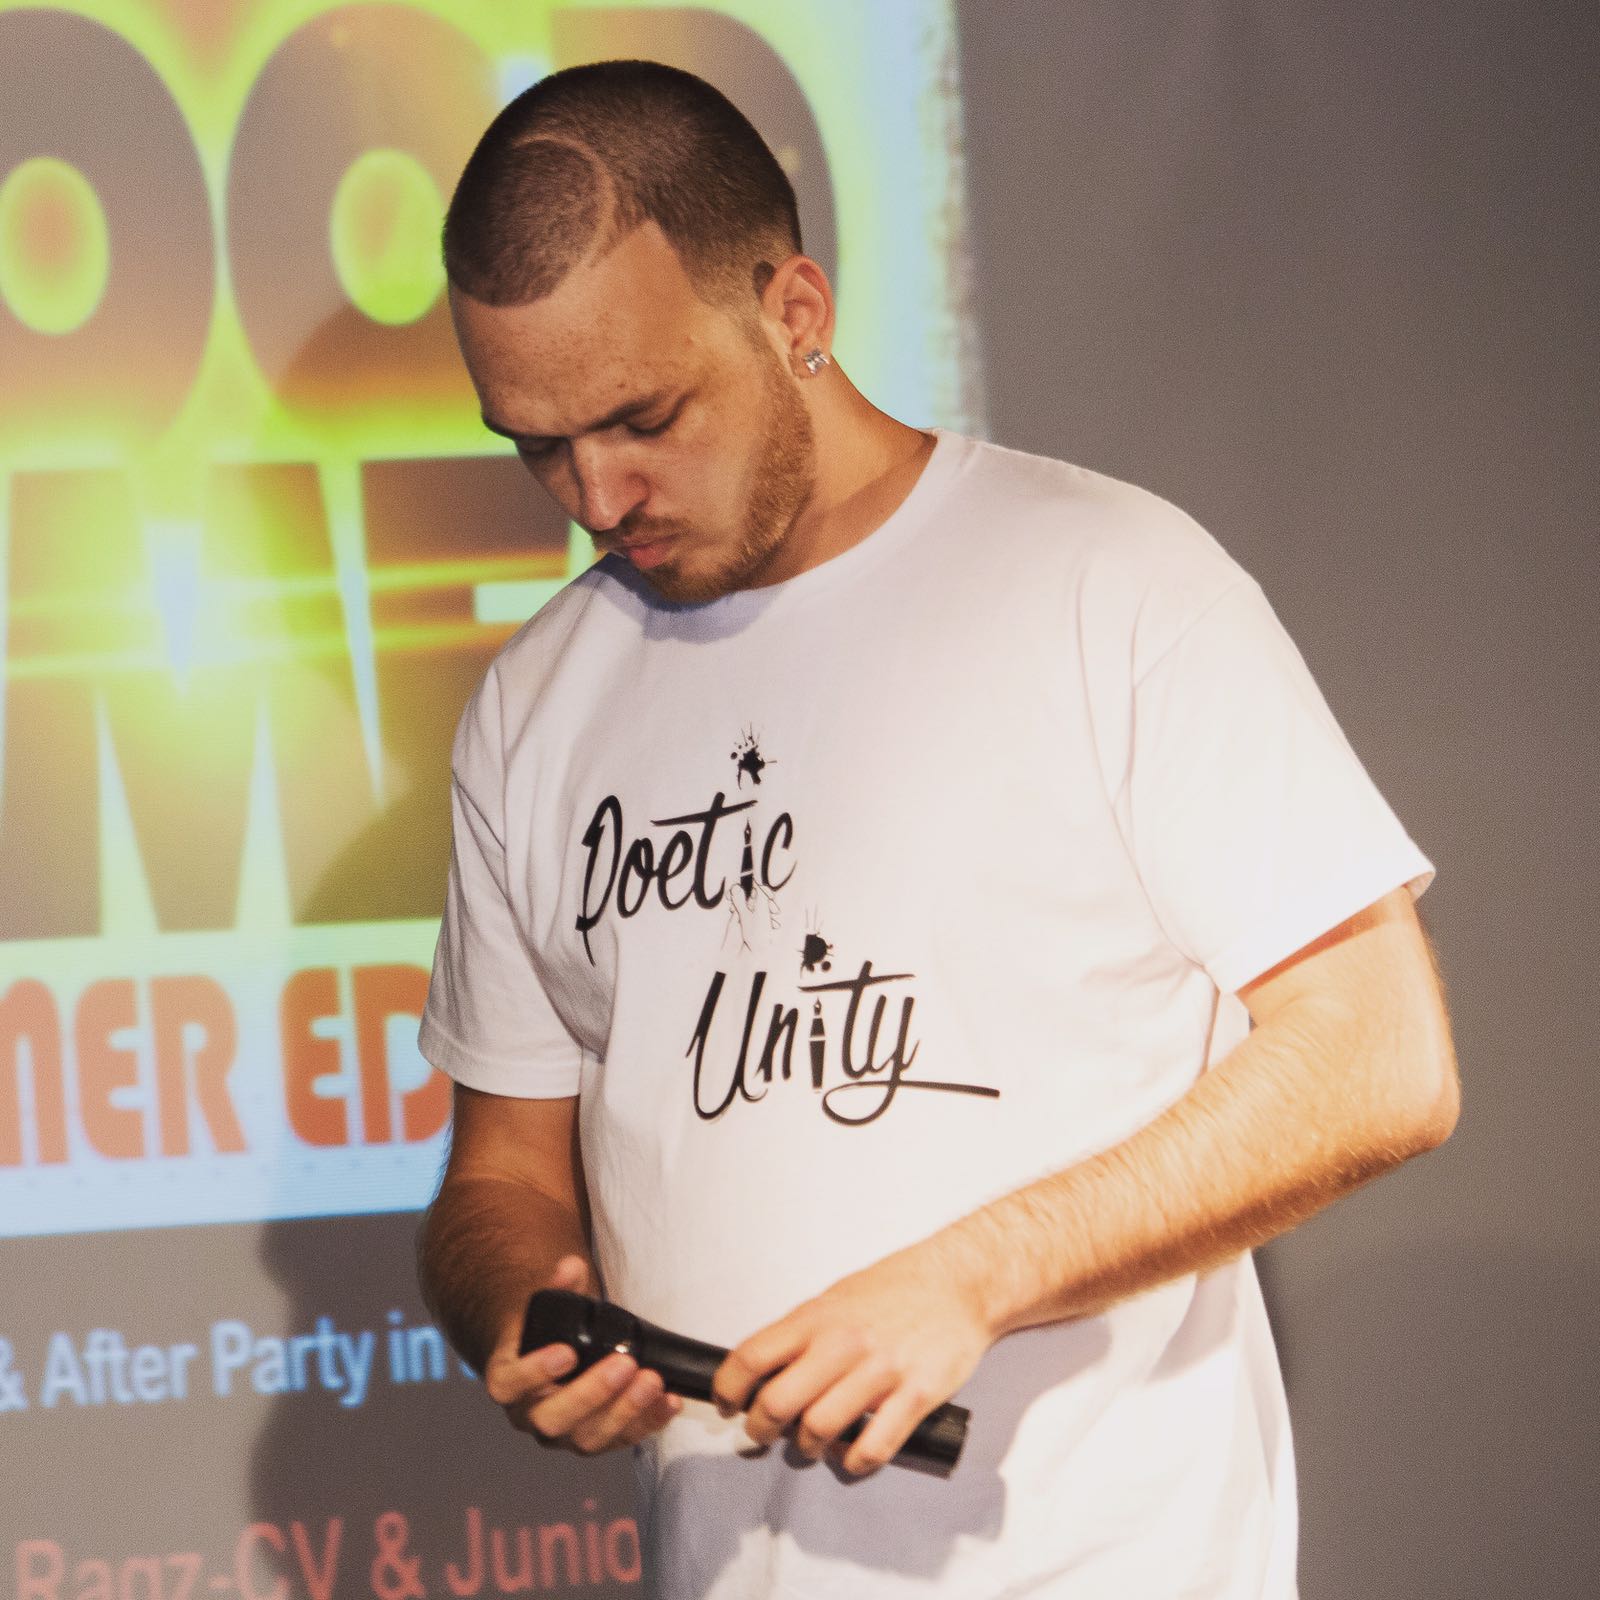 Poetic Unity: An Interview with Ragz CV